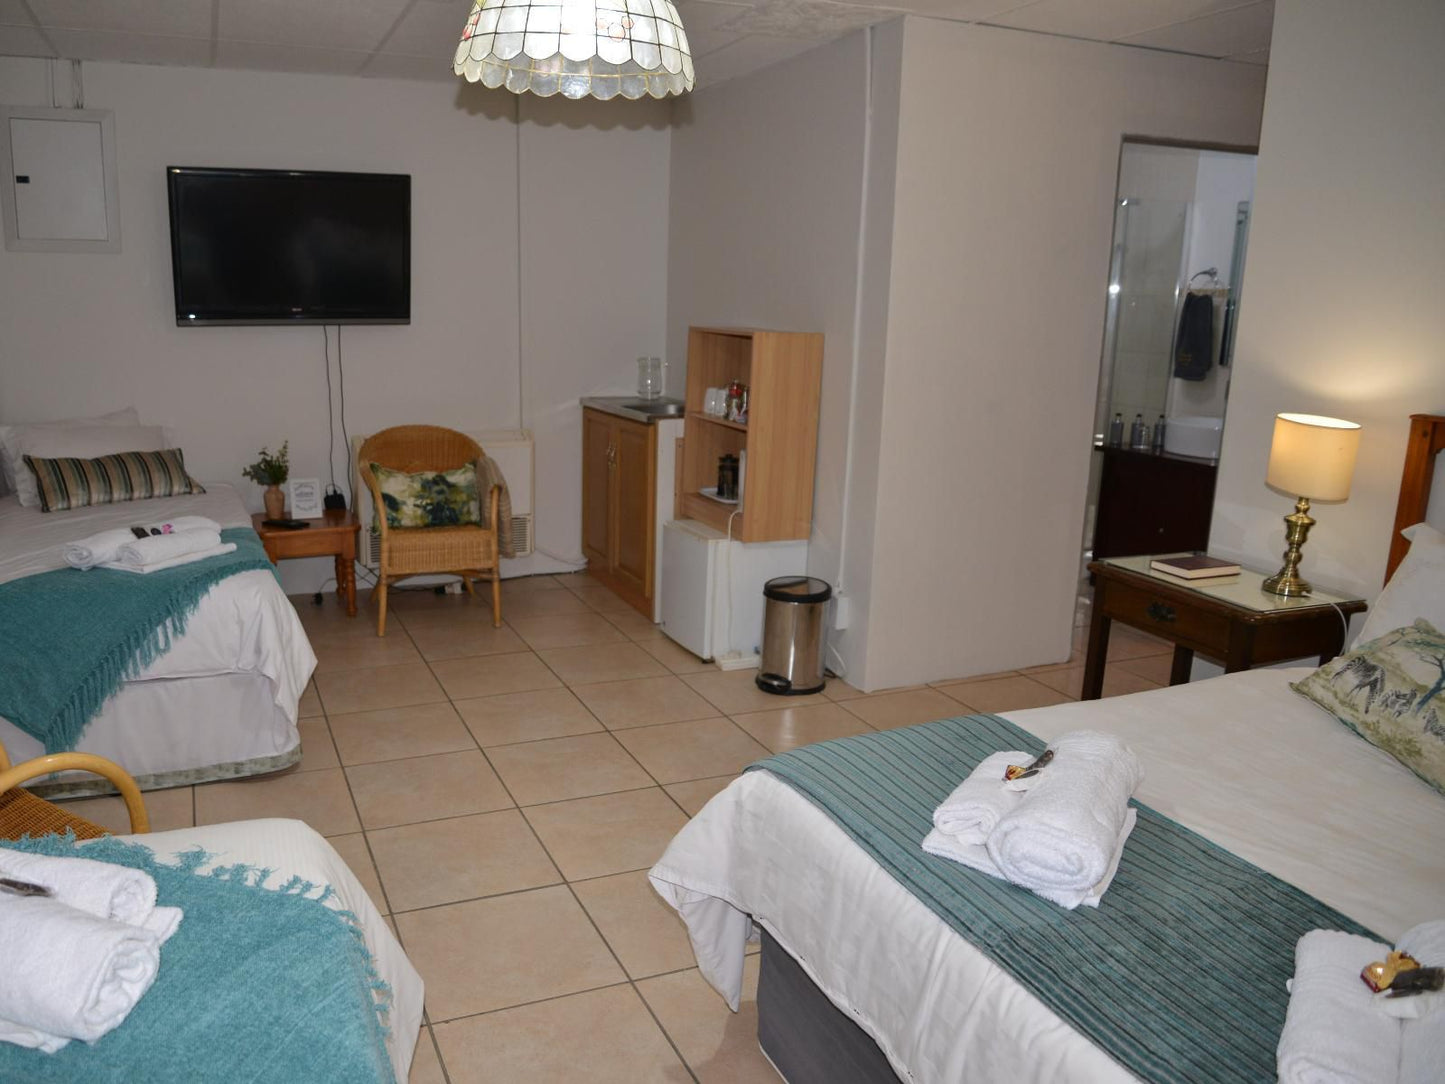 Florentia Guest House Waverley Bloemfontein Free State South Africa 